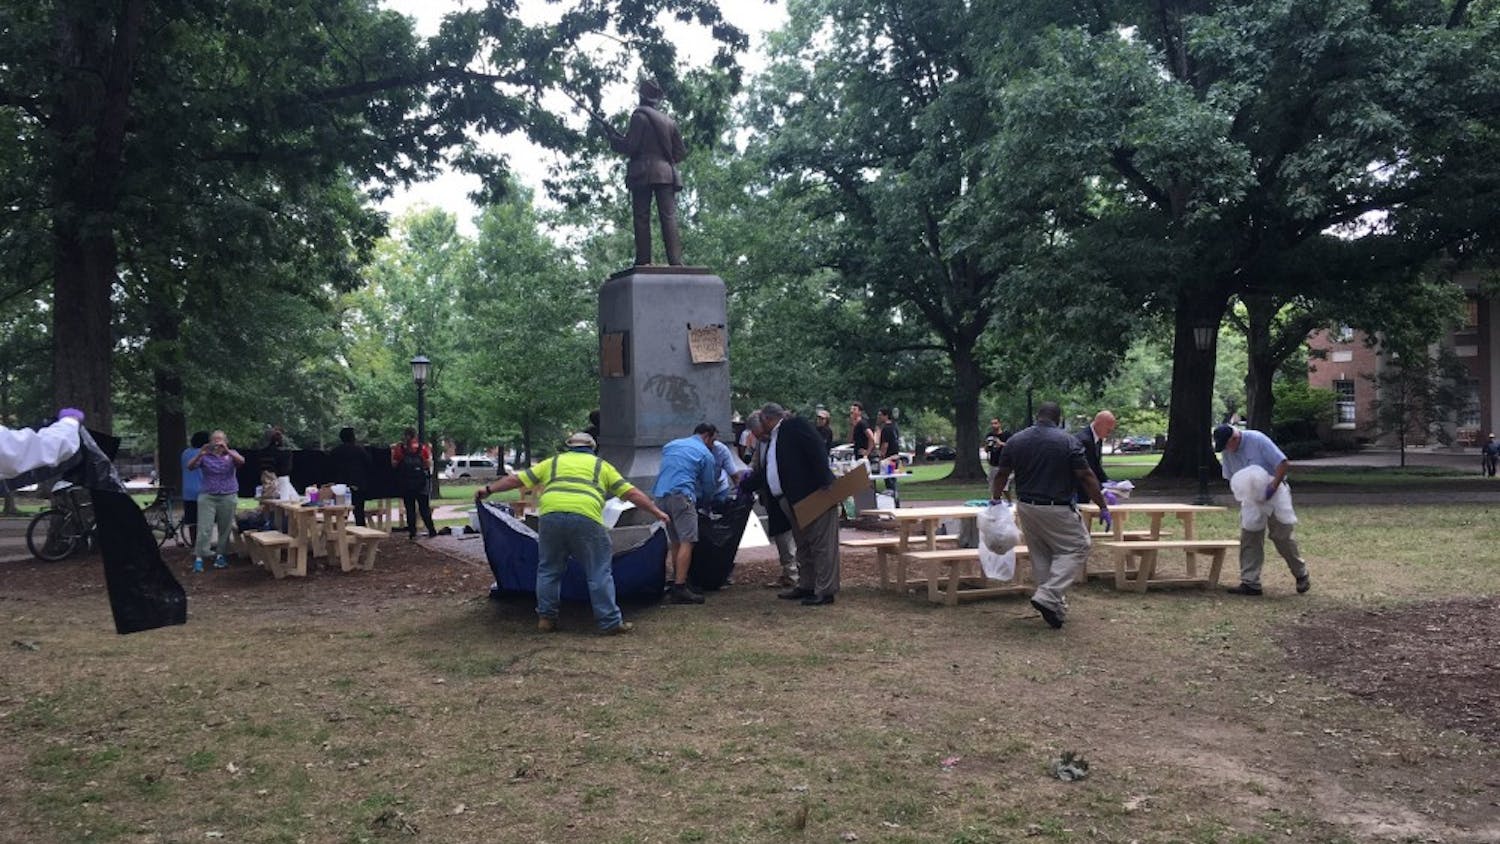 Items removed from surroundings of Silent Sam